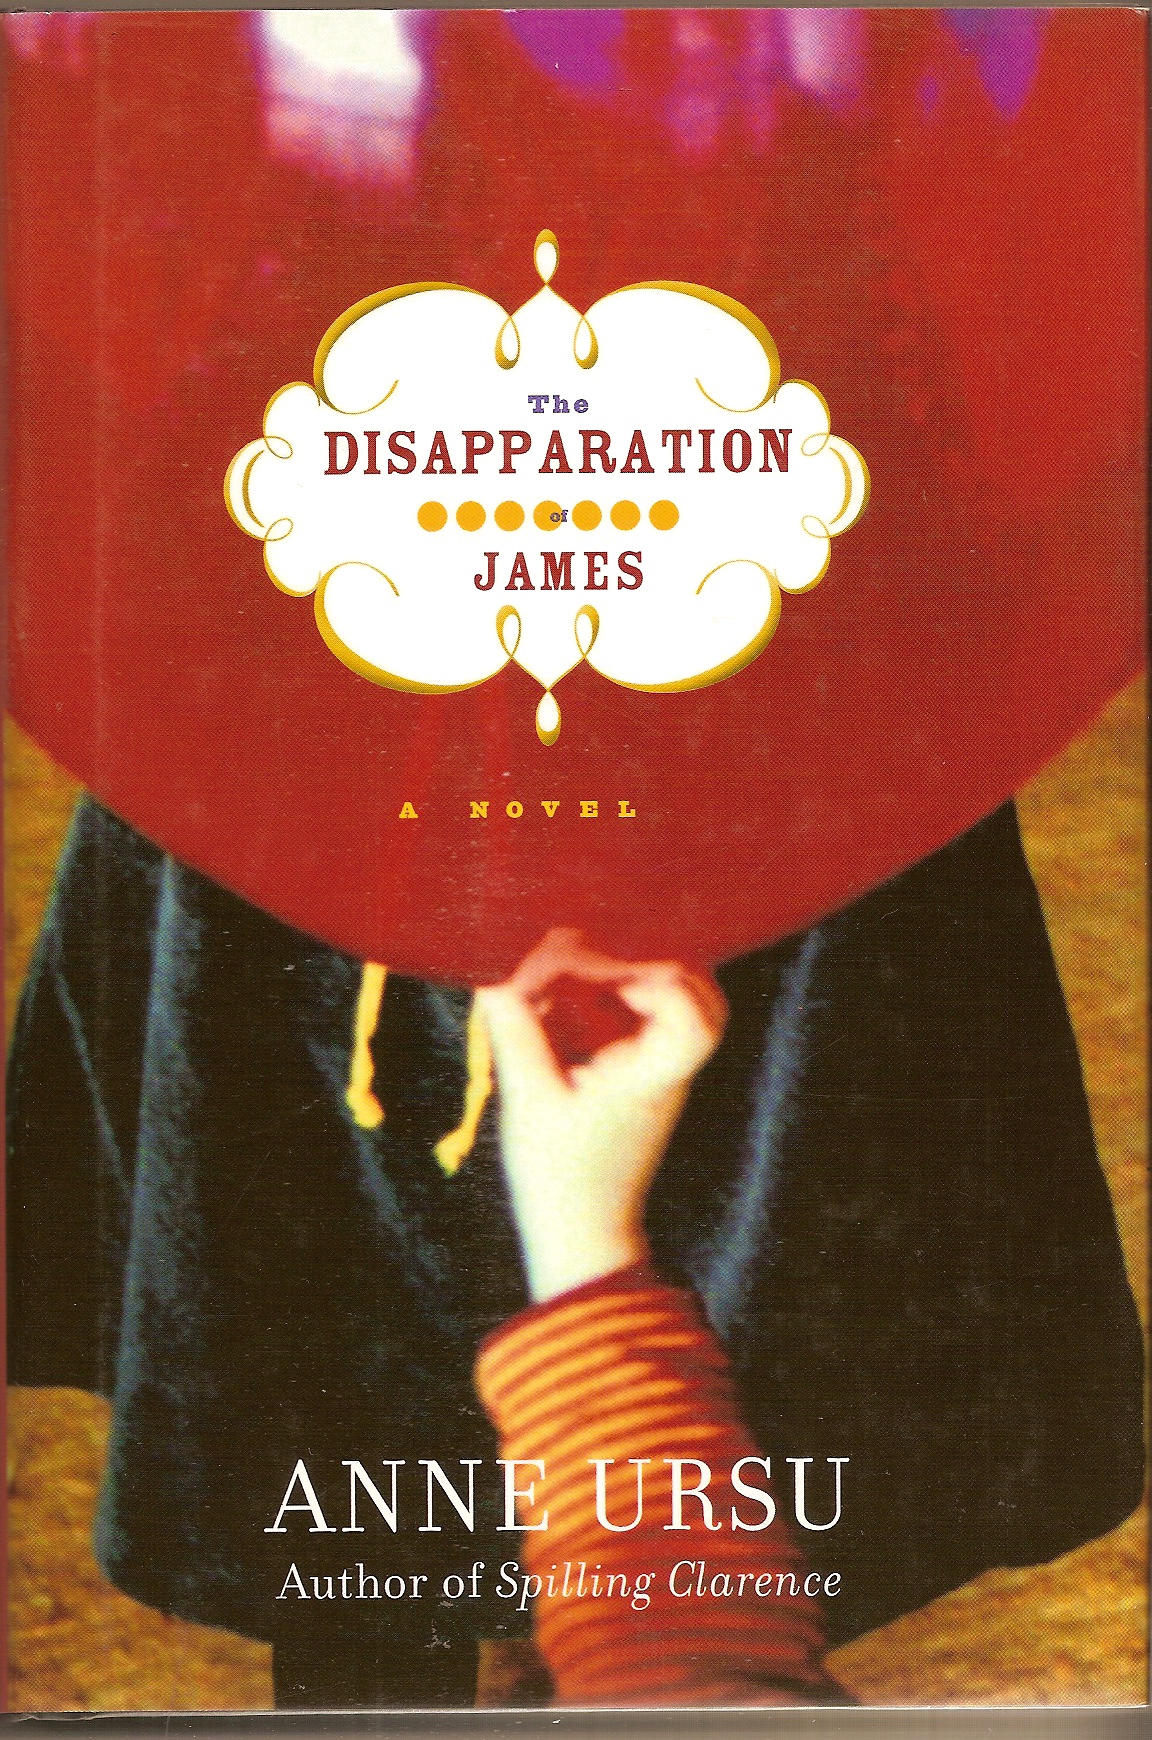 URSU ANNE - Disapparation of James, the